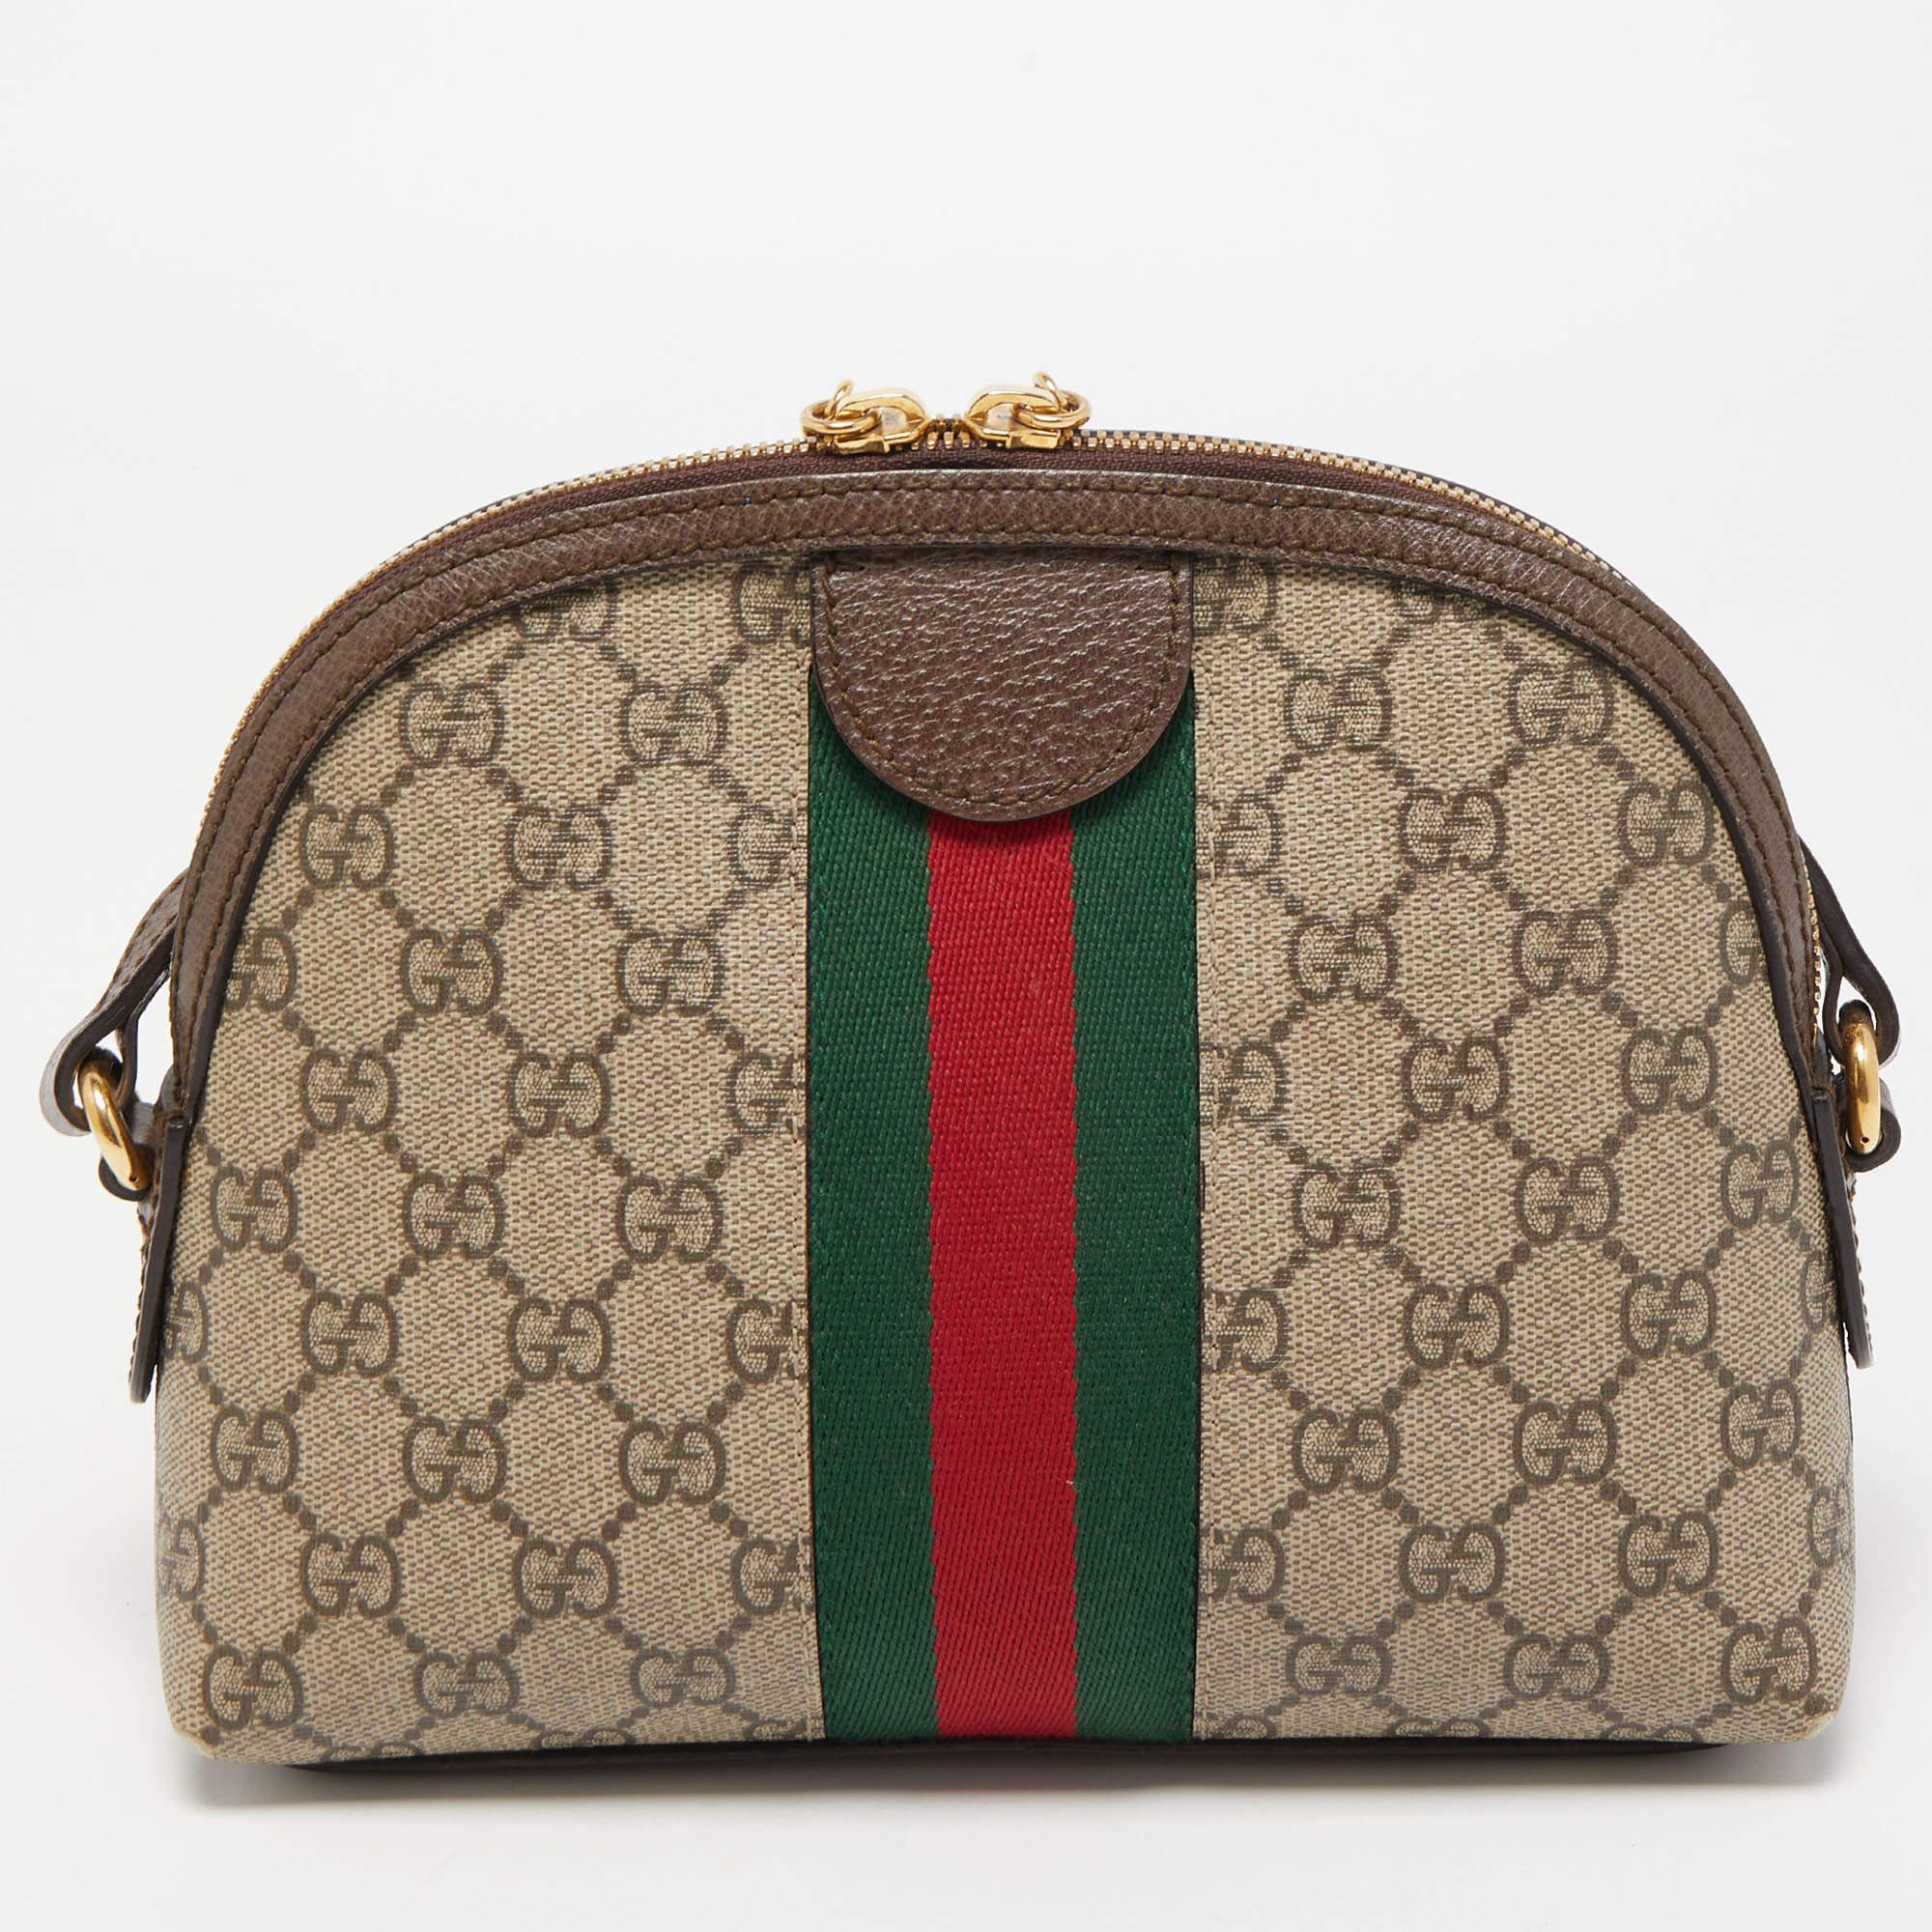 Crafted from GG Supreme canvas and leather, this Gucci Ophidia bag comes in a structured shape that exudes sophistication. It features the iconic Web stripe and the GG motif that has defined Gucci for a long time. The bag suspends from a slender